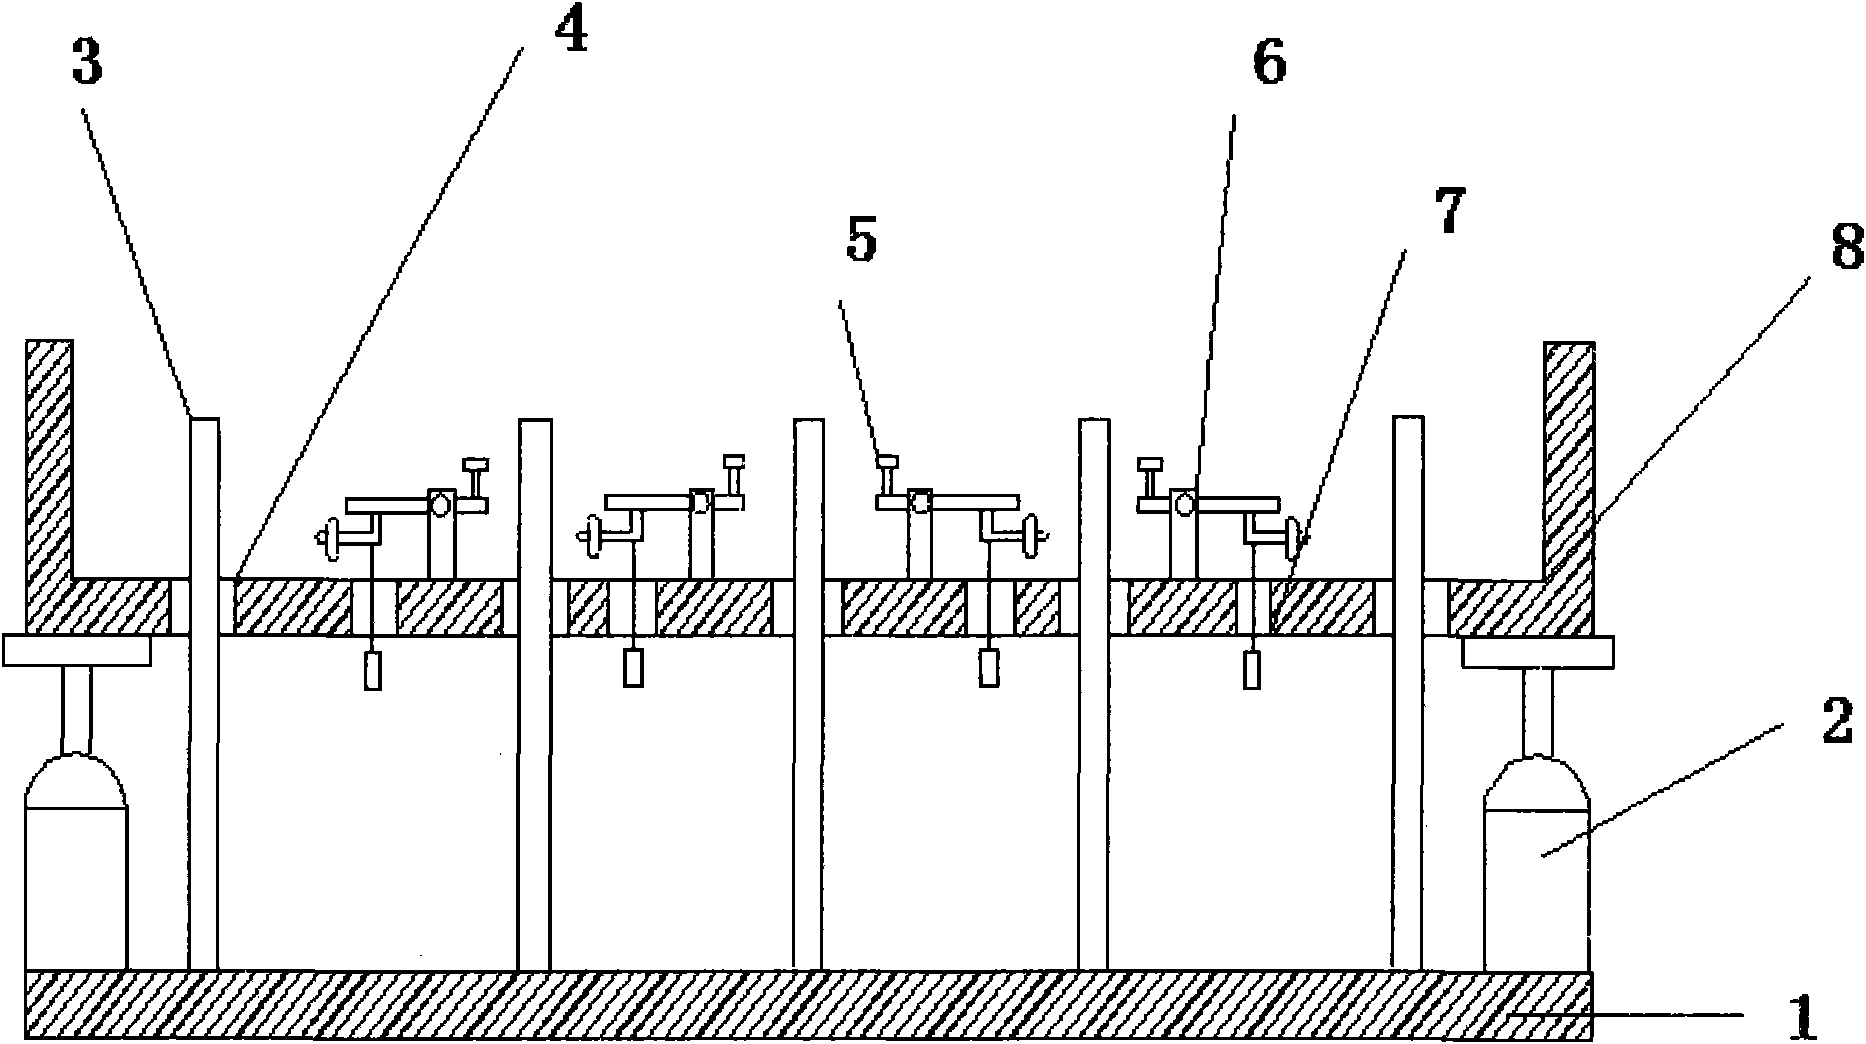 Supporting system for machining of large-caliber space optical reflectors